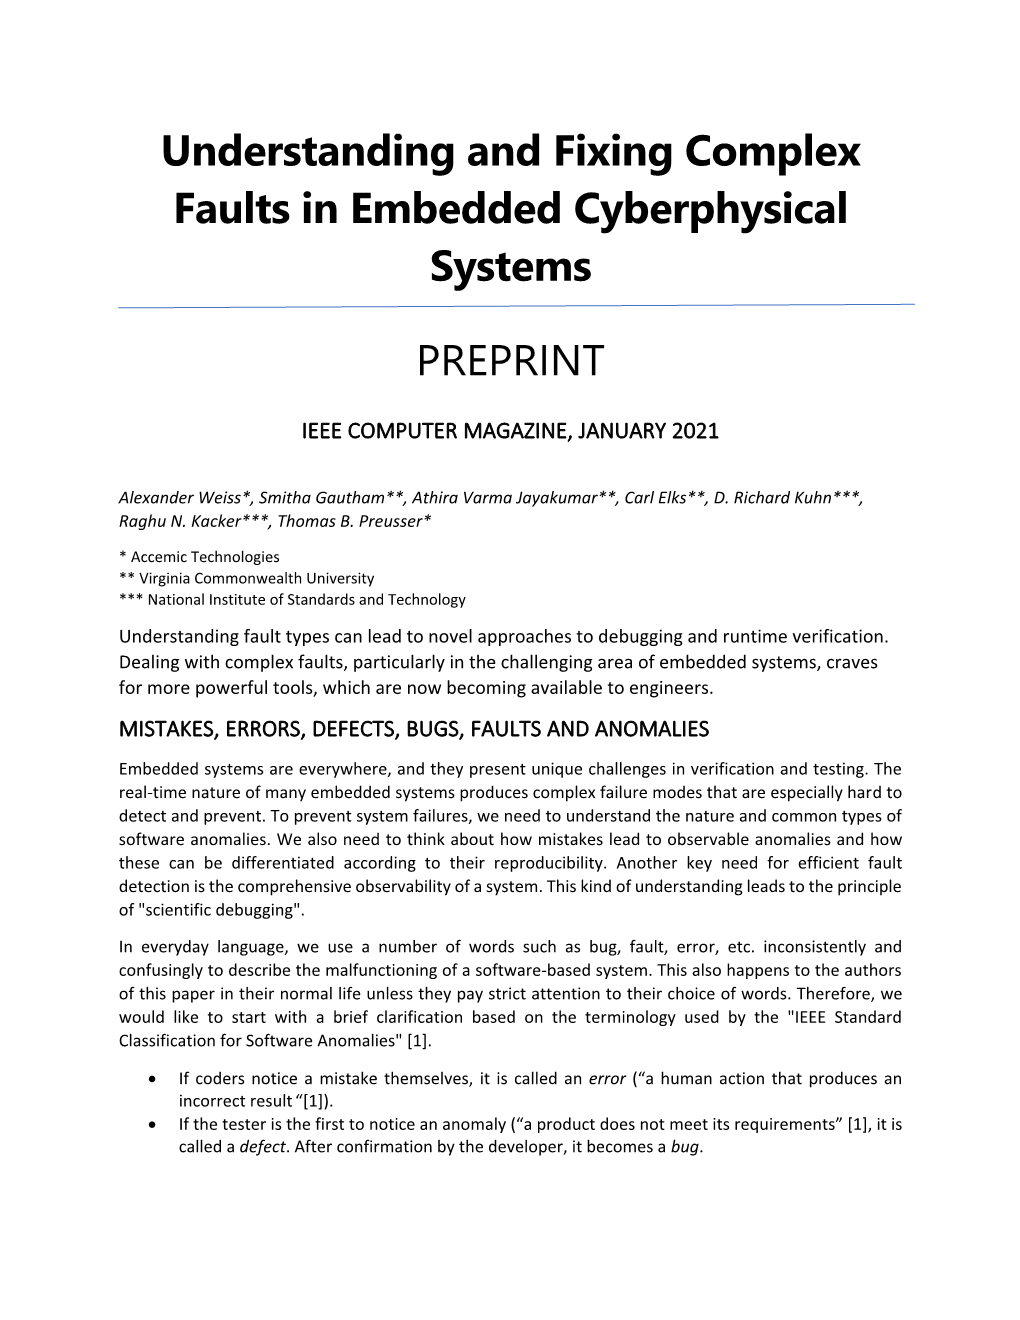 Fixing Complex Faults in Embedded Cyberphysical Systems